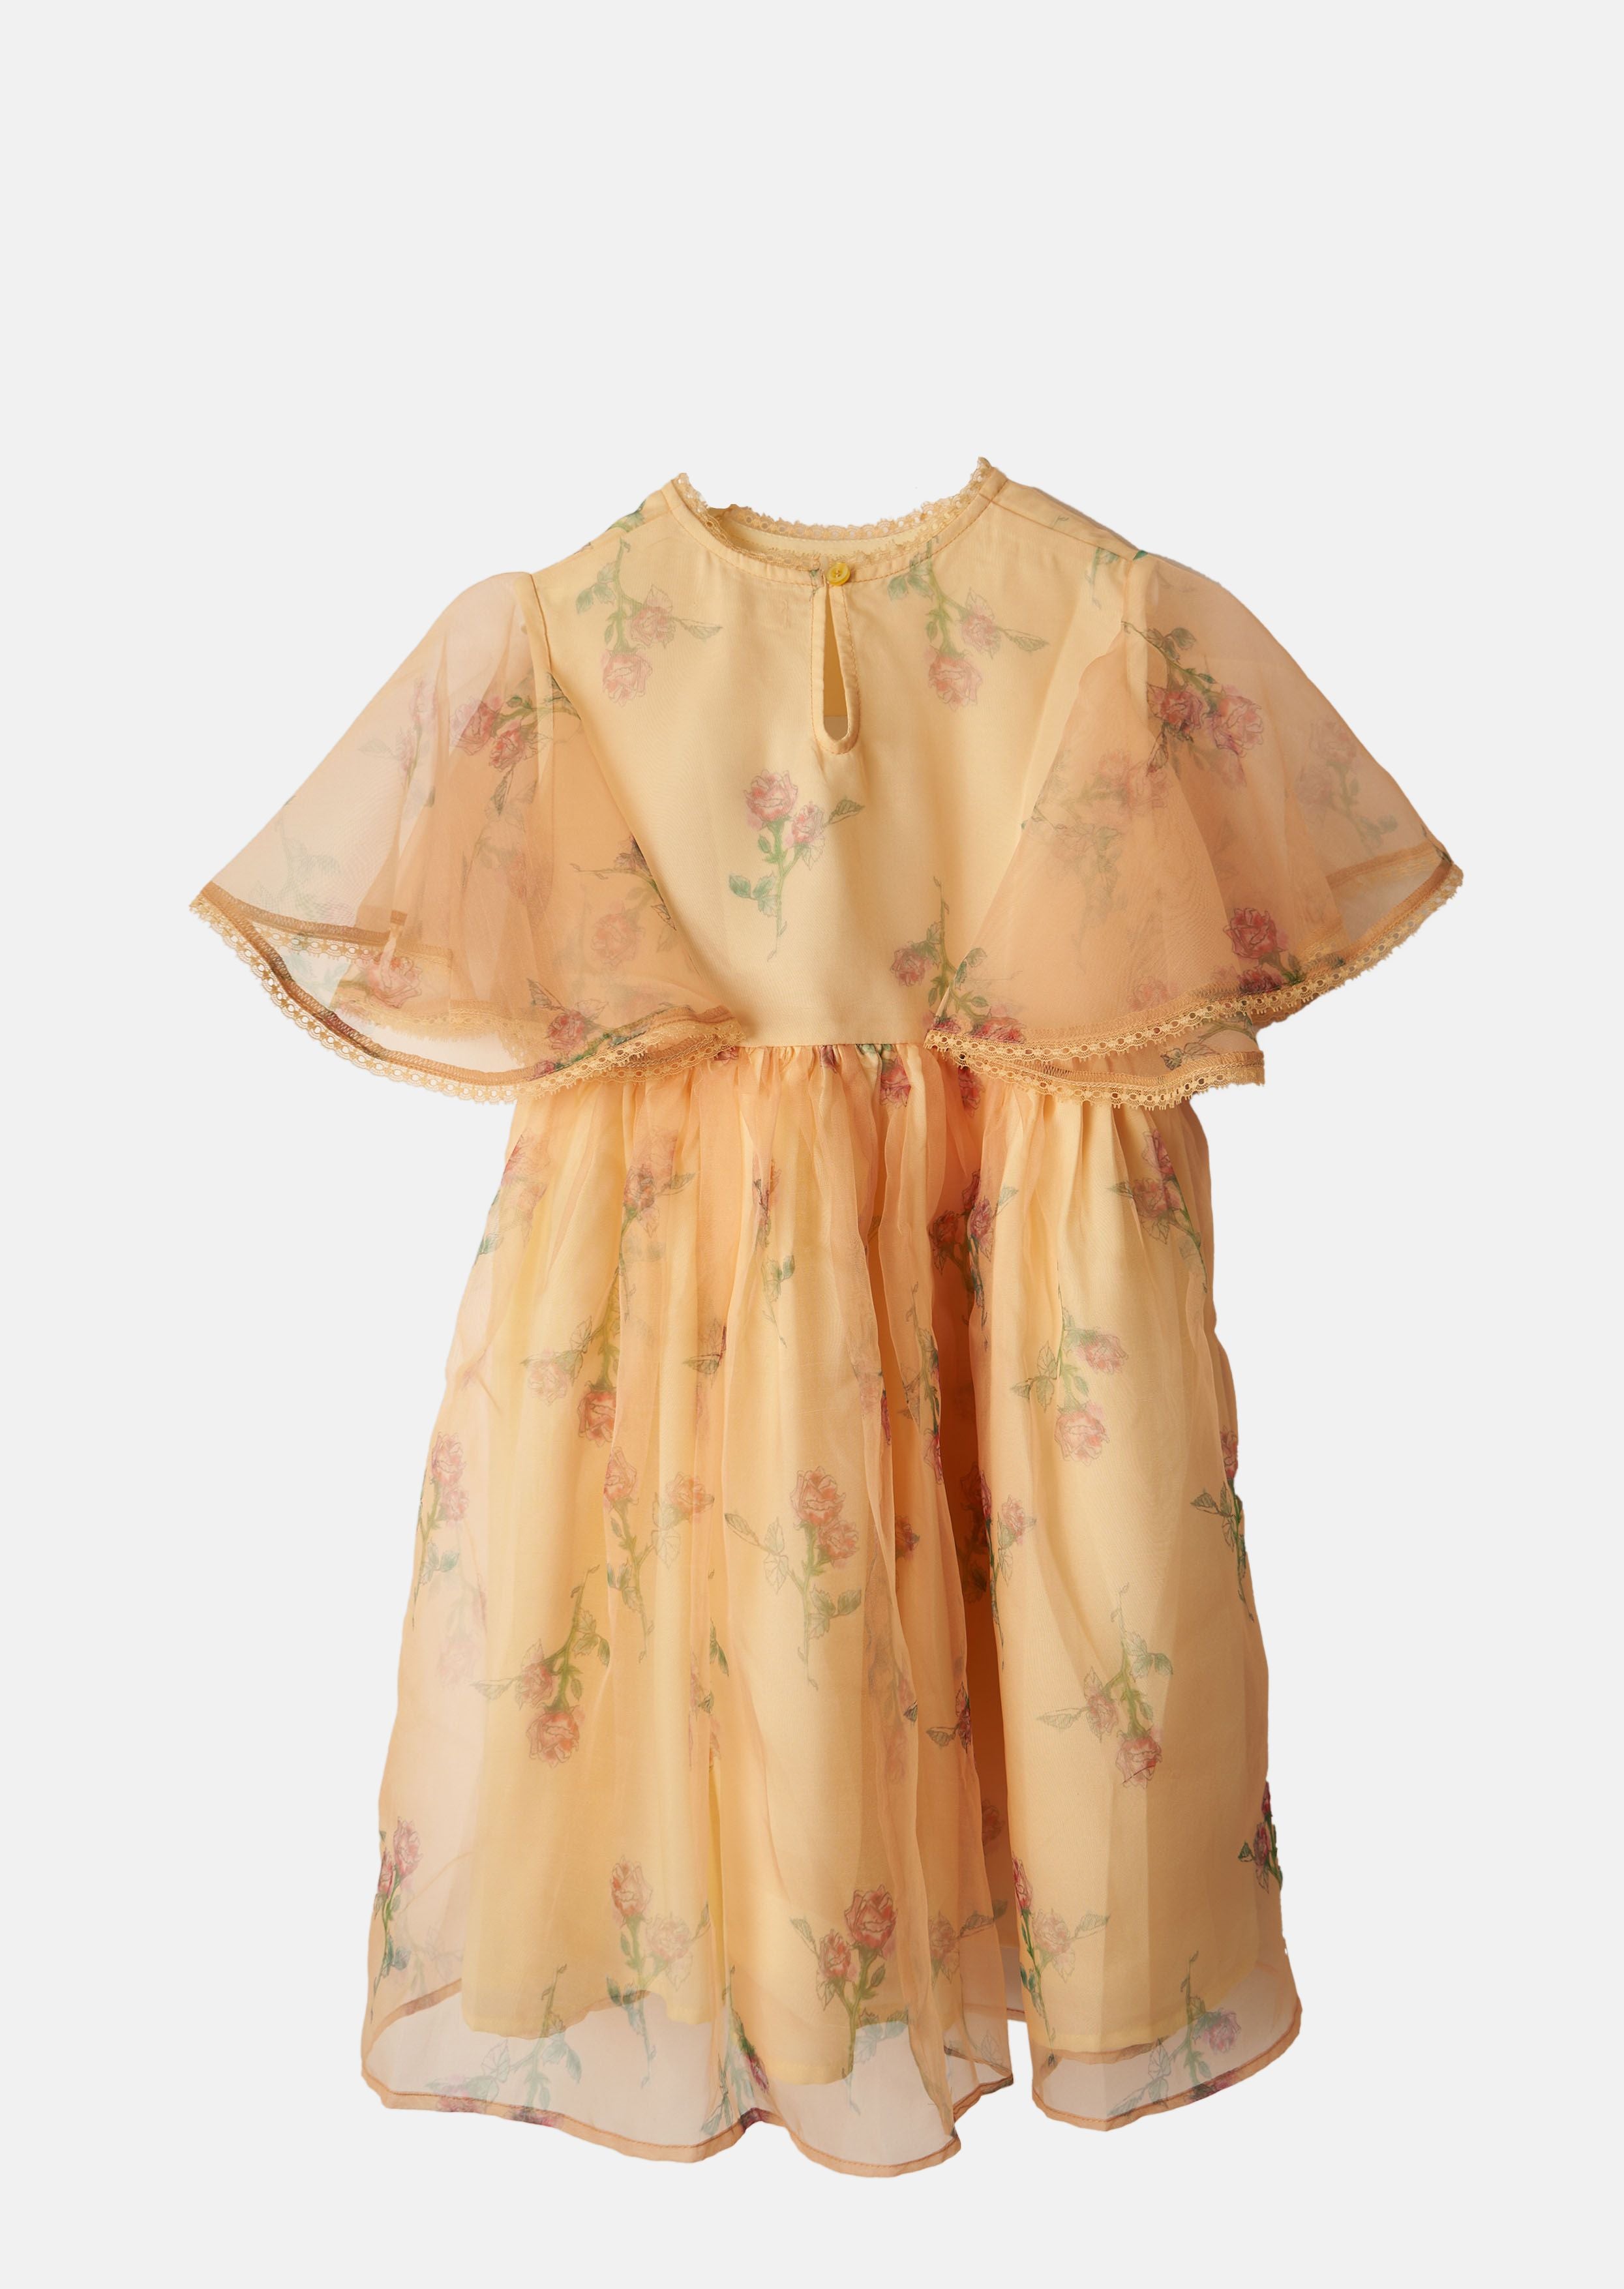 Girls Floral Printed Yellow Dress with Cape Sleeved